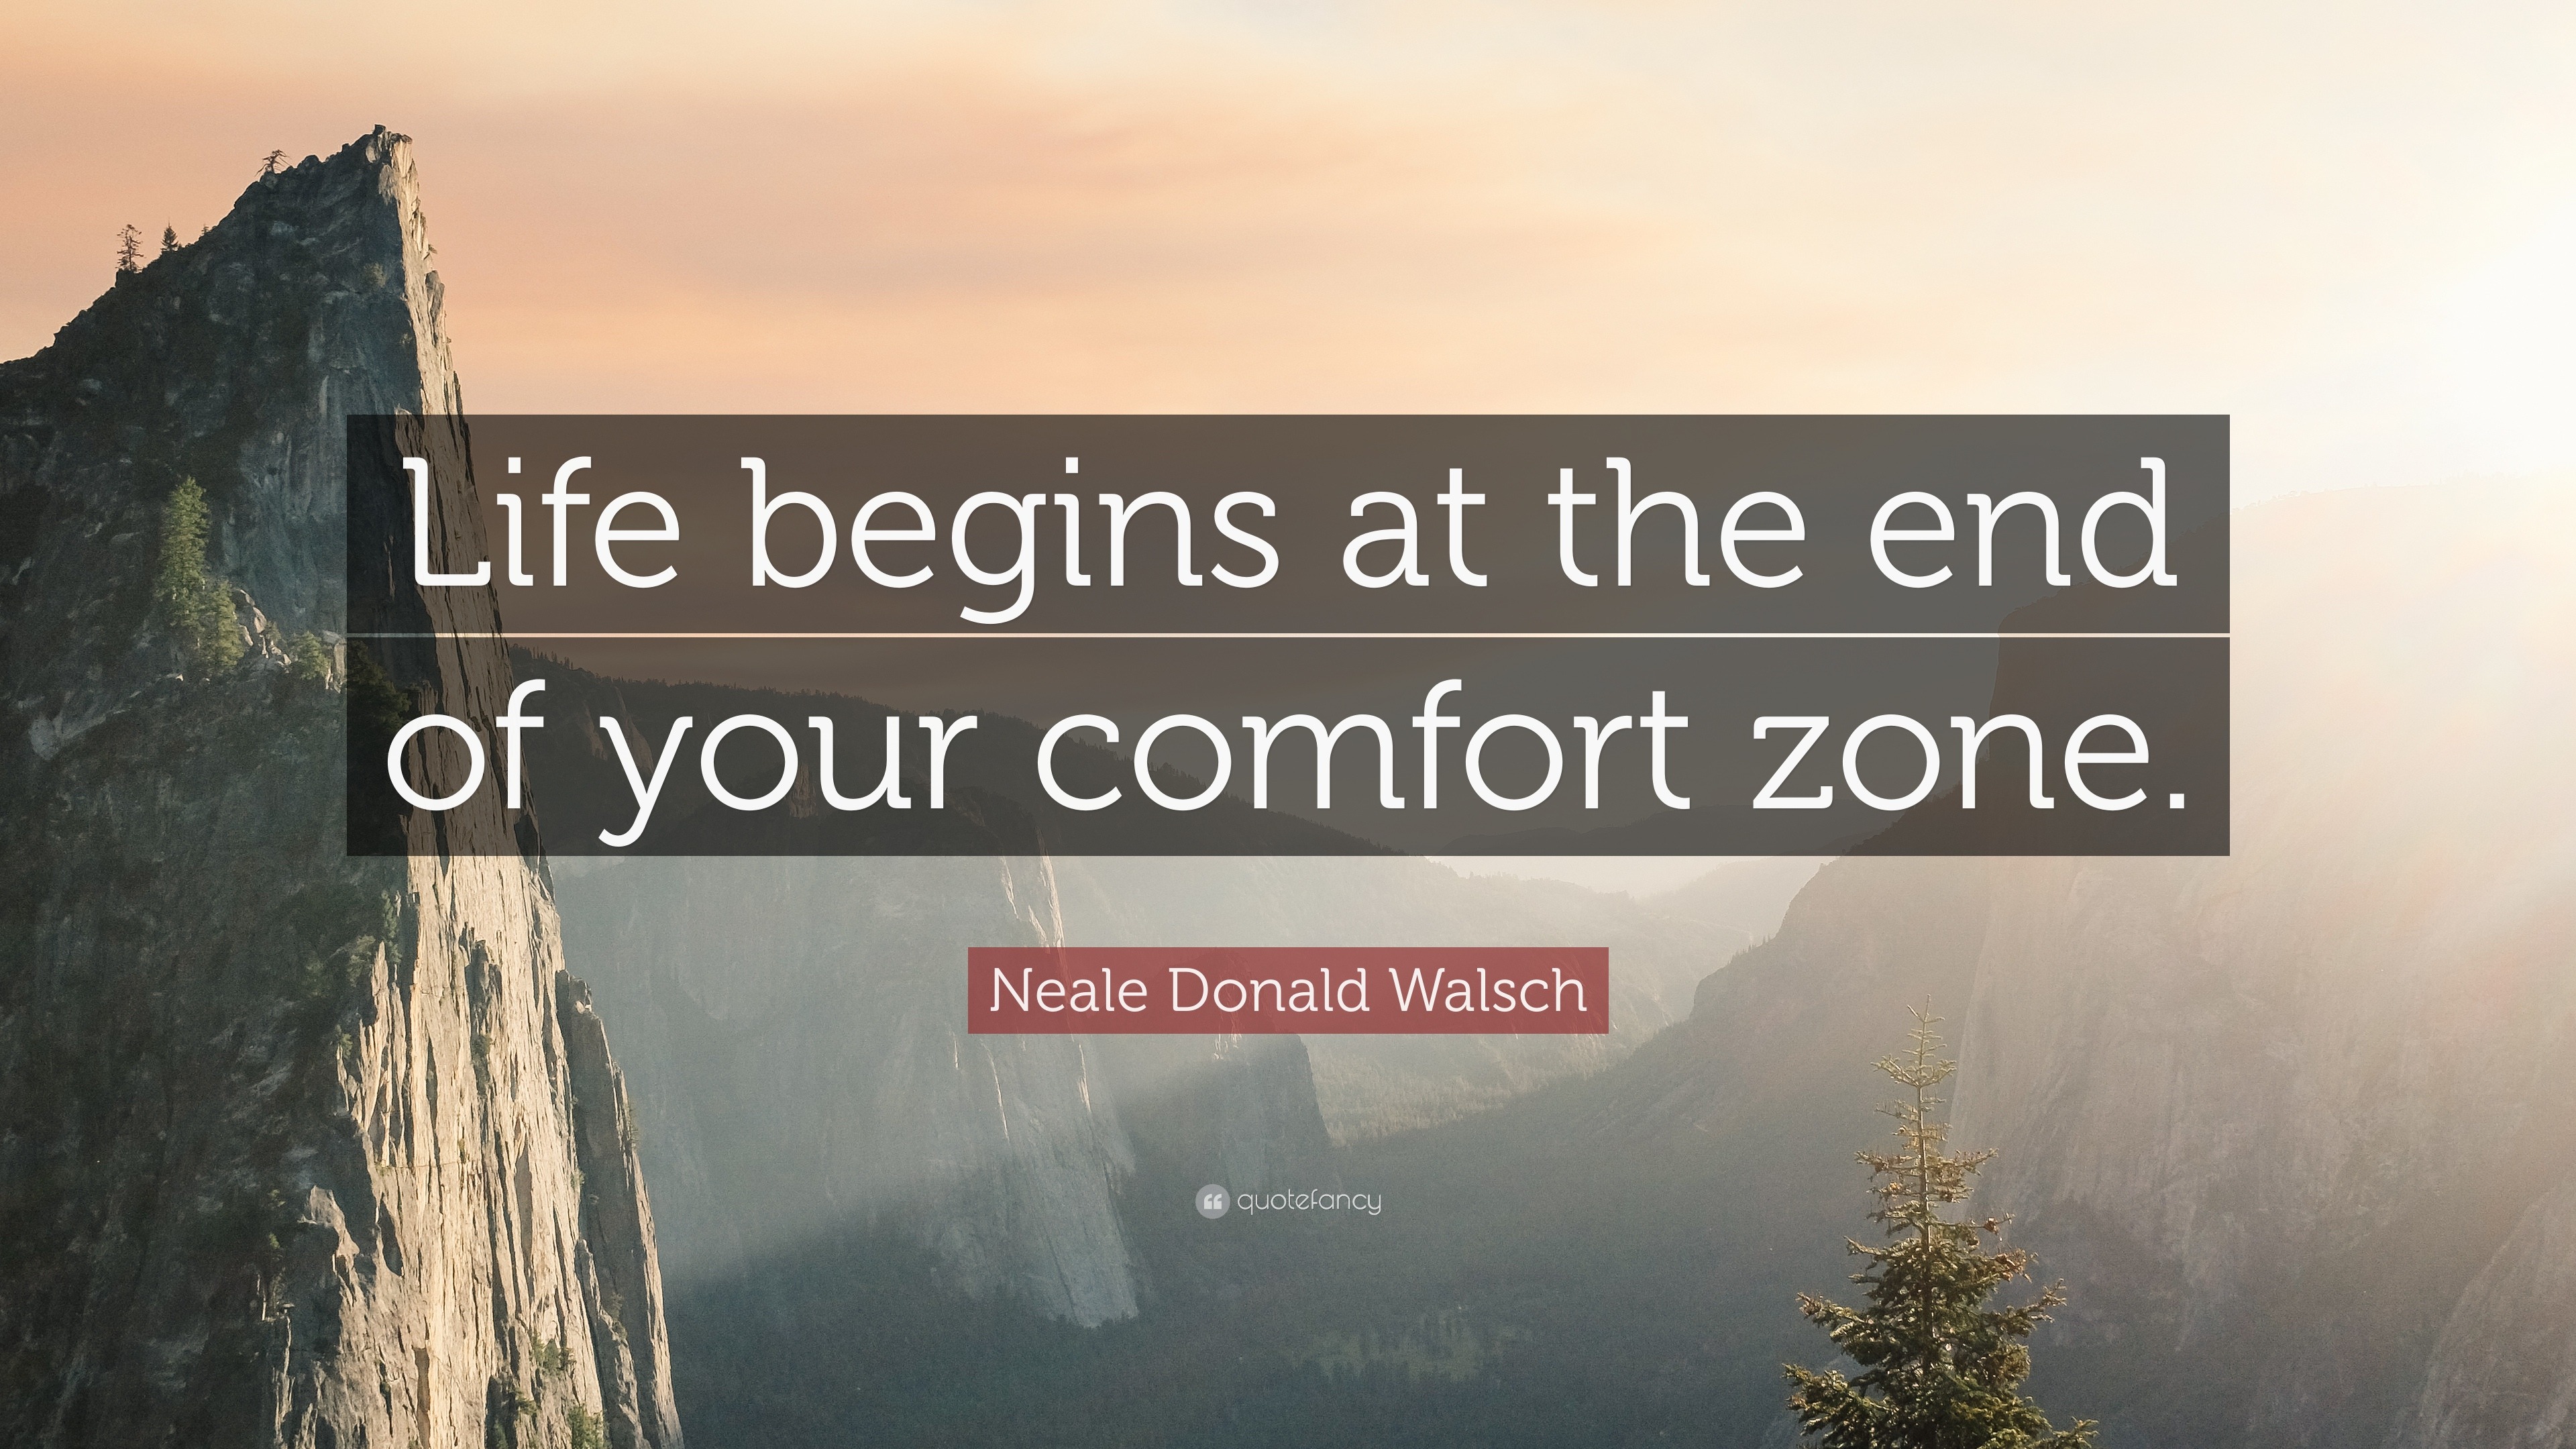 Neale Donald Walsch Quote Life Begins At The End Of Your Comfort